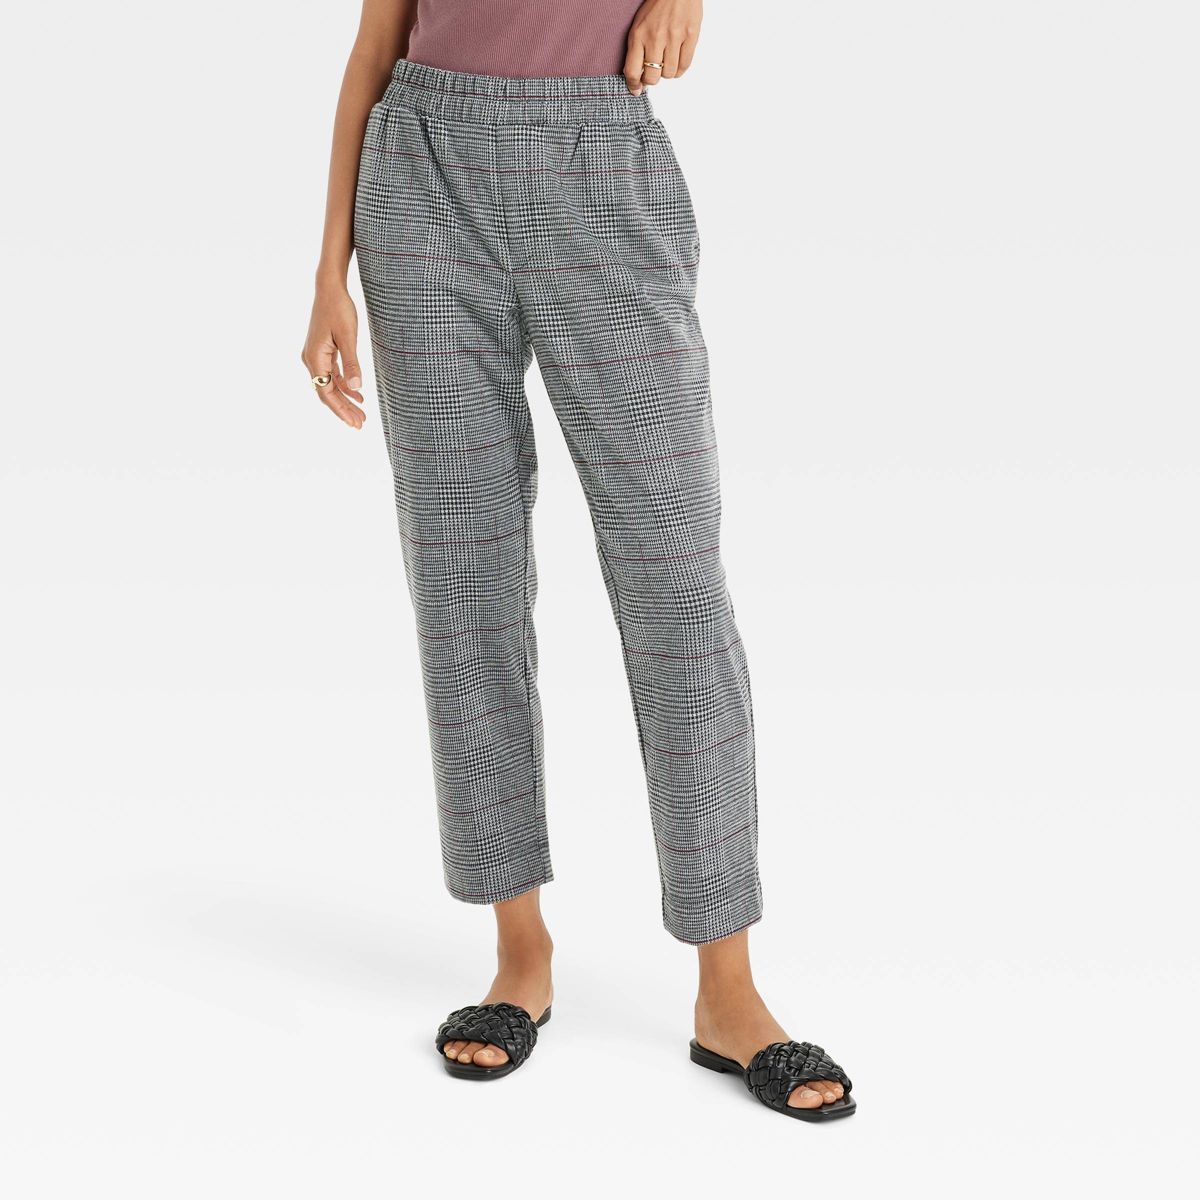 Women's High-Rise Slim Straight Fit Ankle Pull-On Pants - A New Day™ Heathered Gray XS | Target